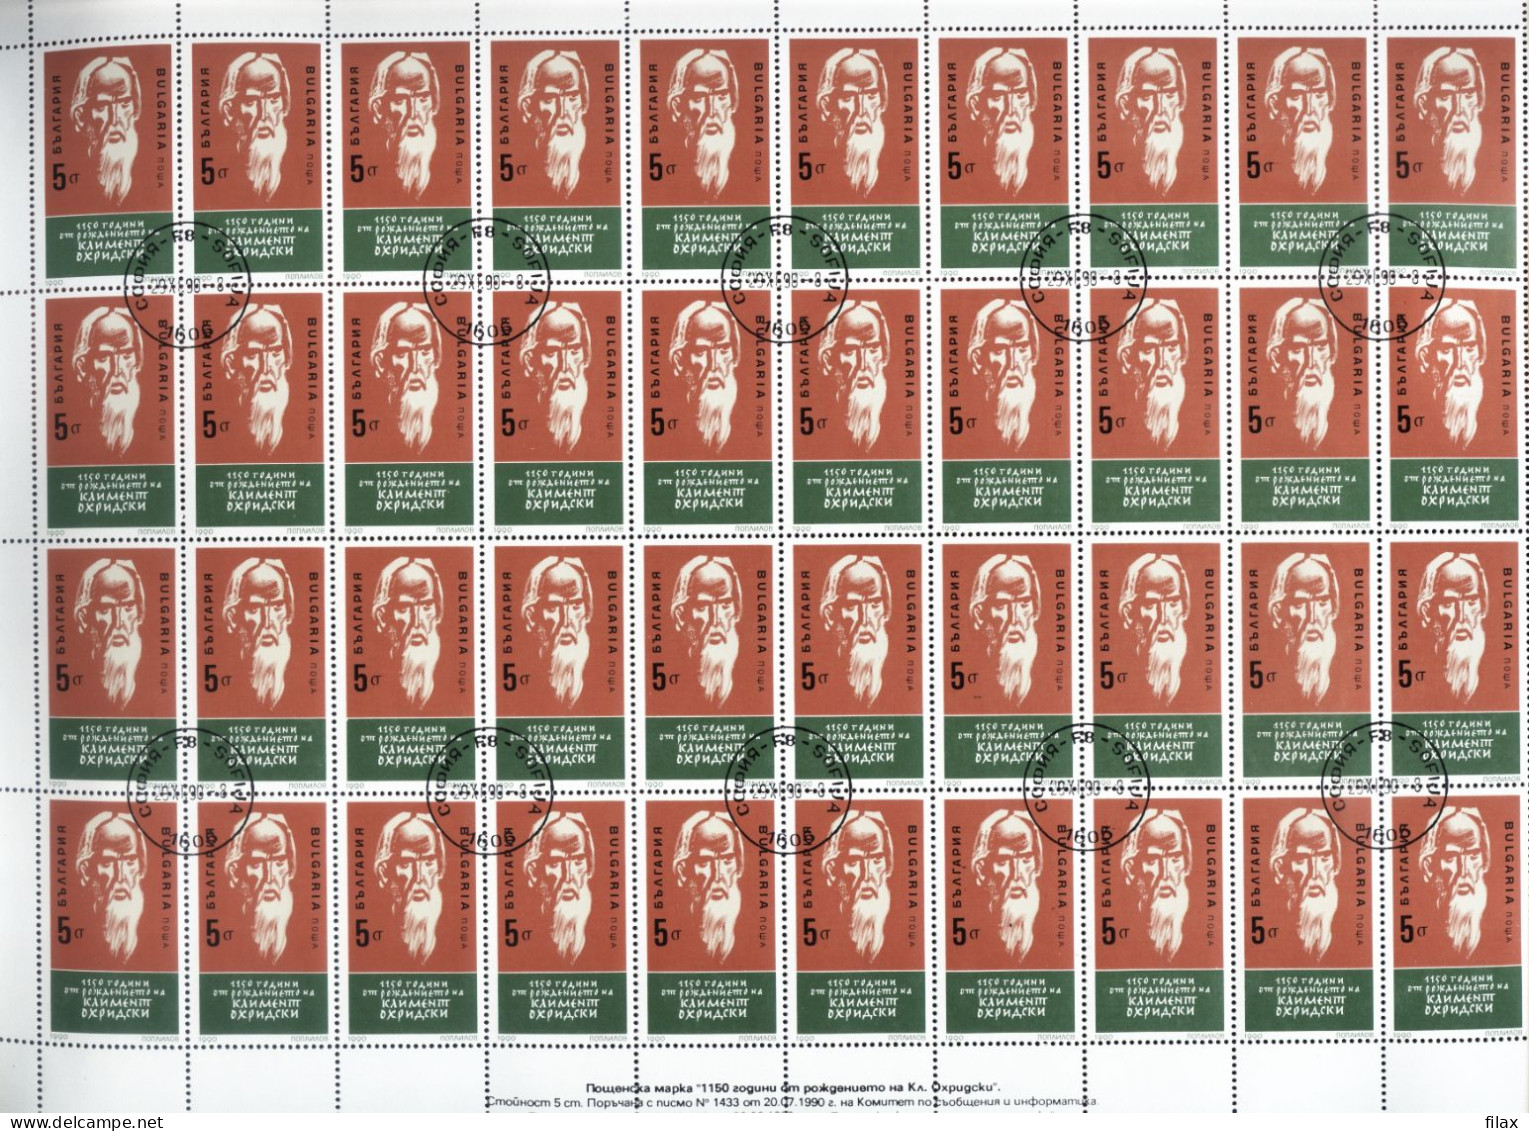 LOT BGCTO01 -  CHEAP  CTO  STAMPS  IN  SHEETS (for packets or resale)